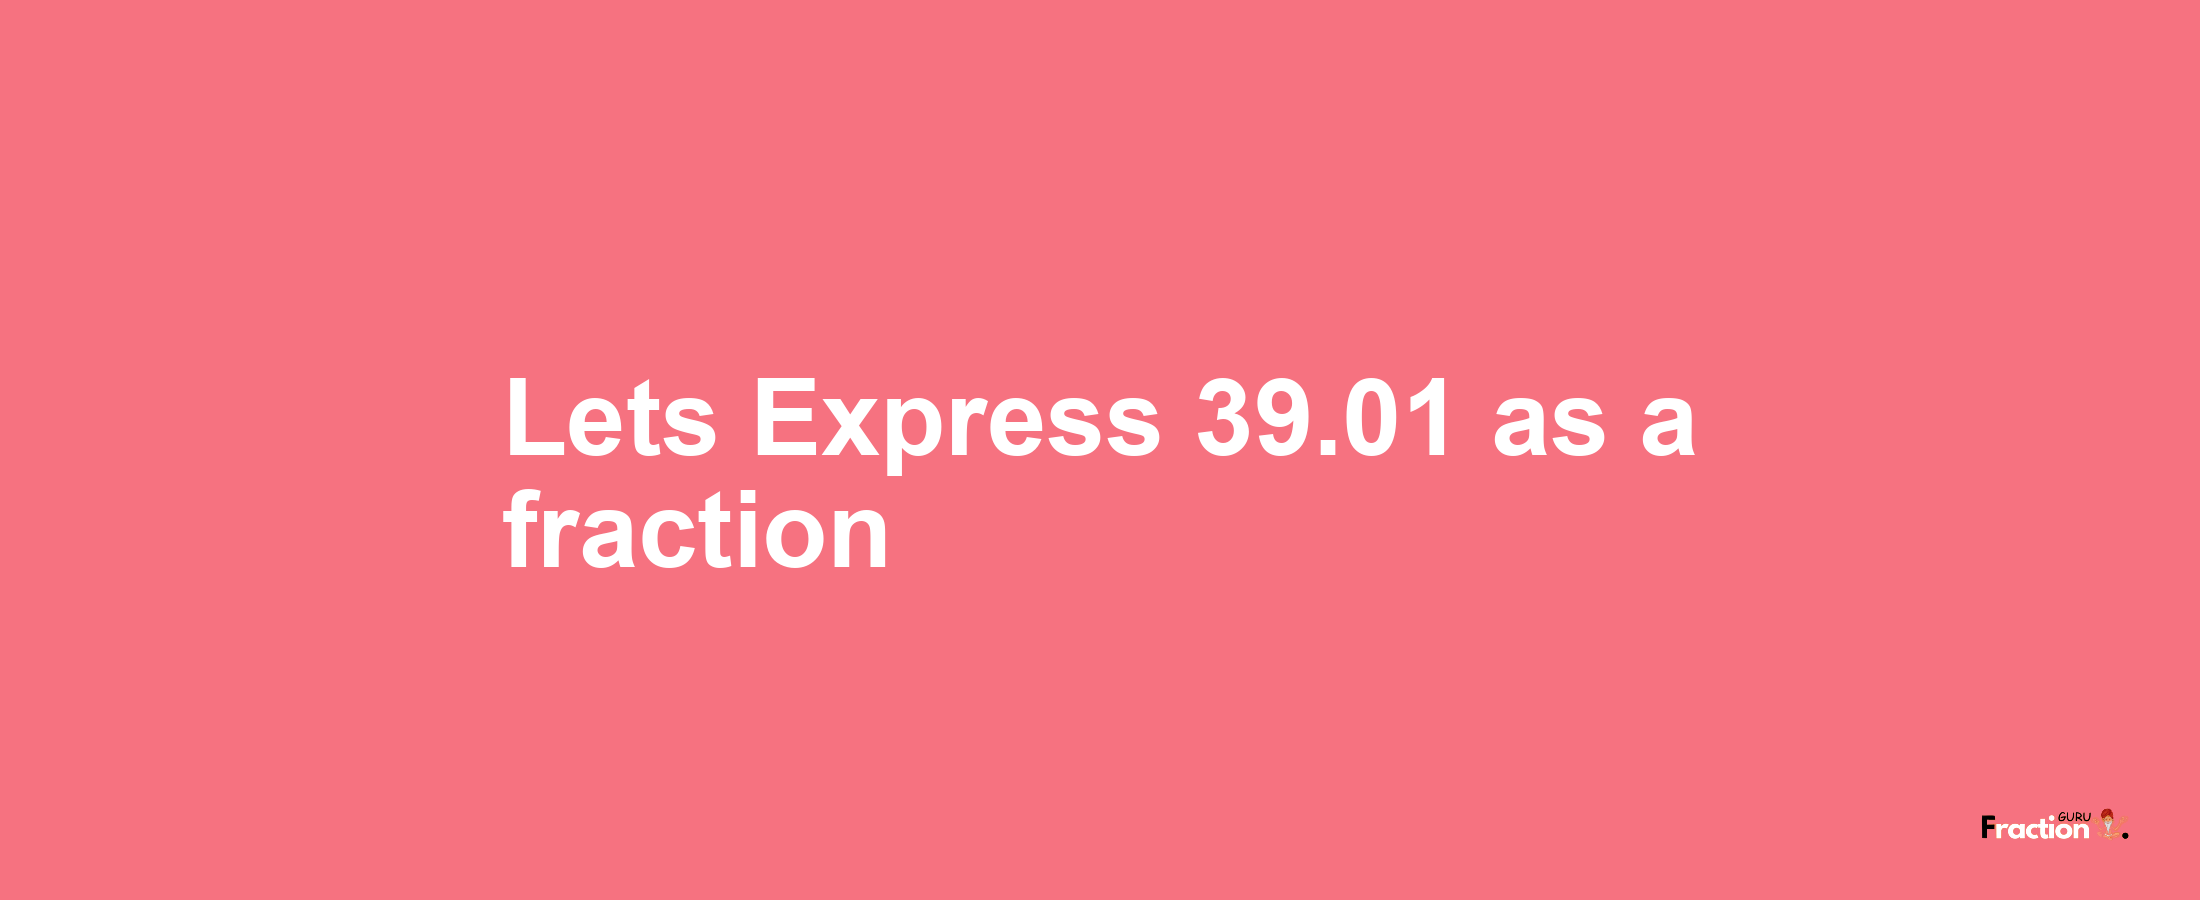 Lets Express 39.01 as afraction